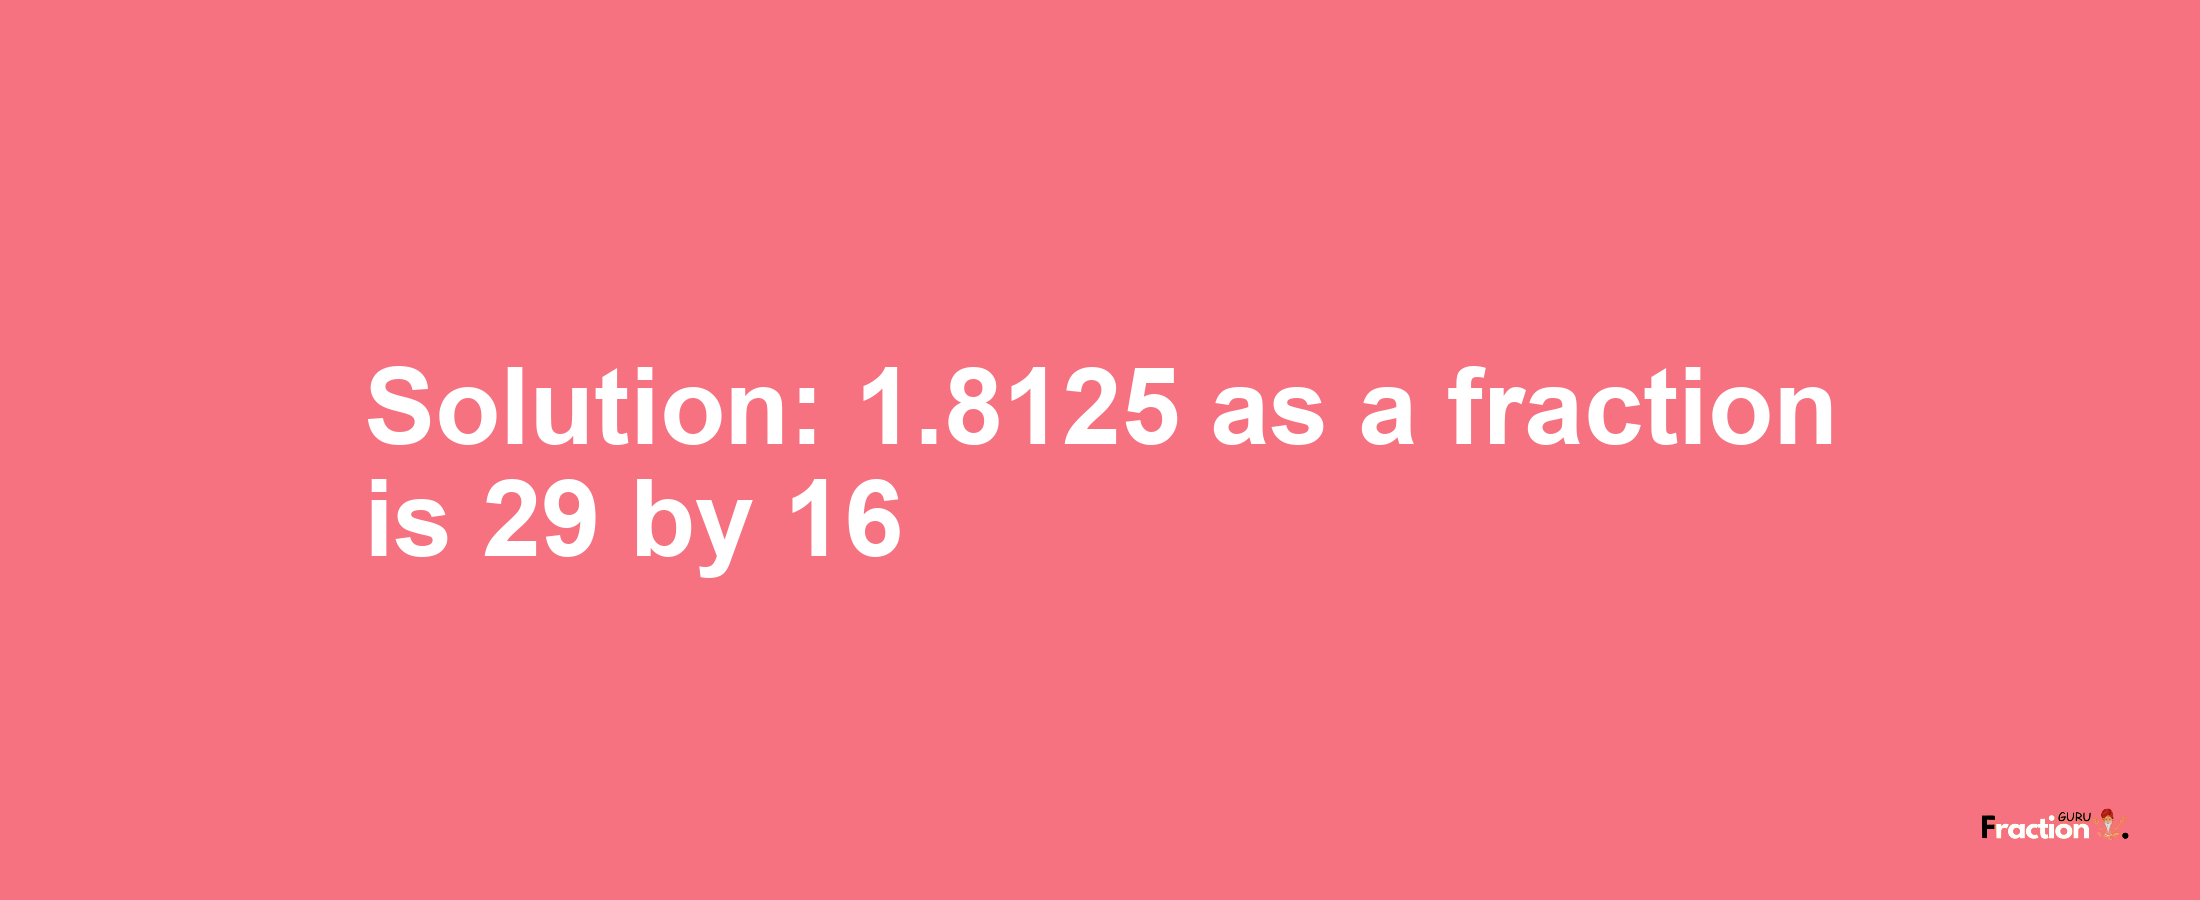 Solution:1.8125 as a fraction is 29/16